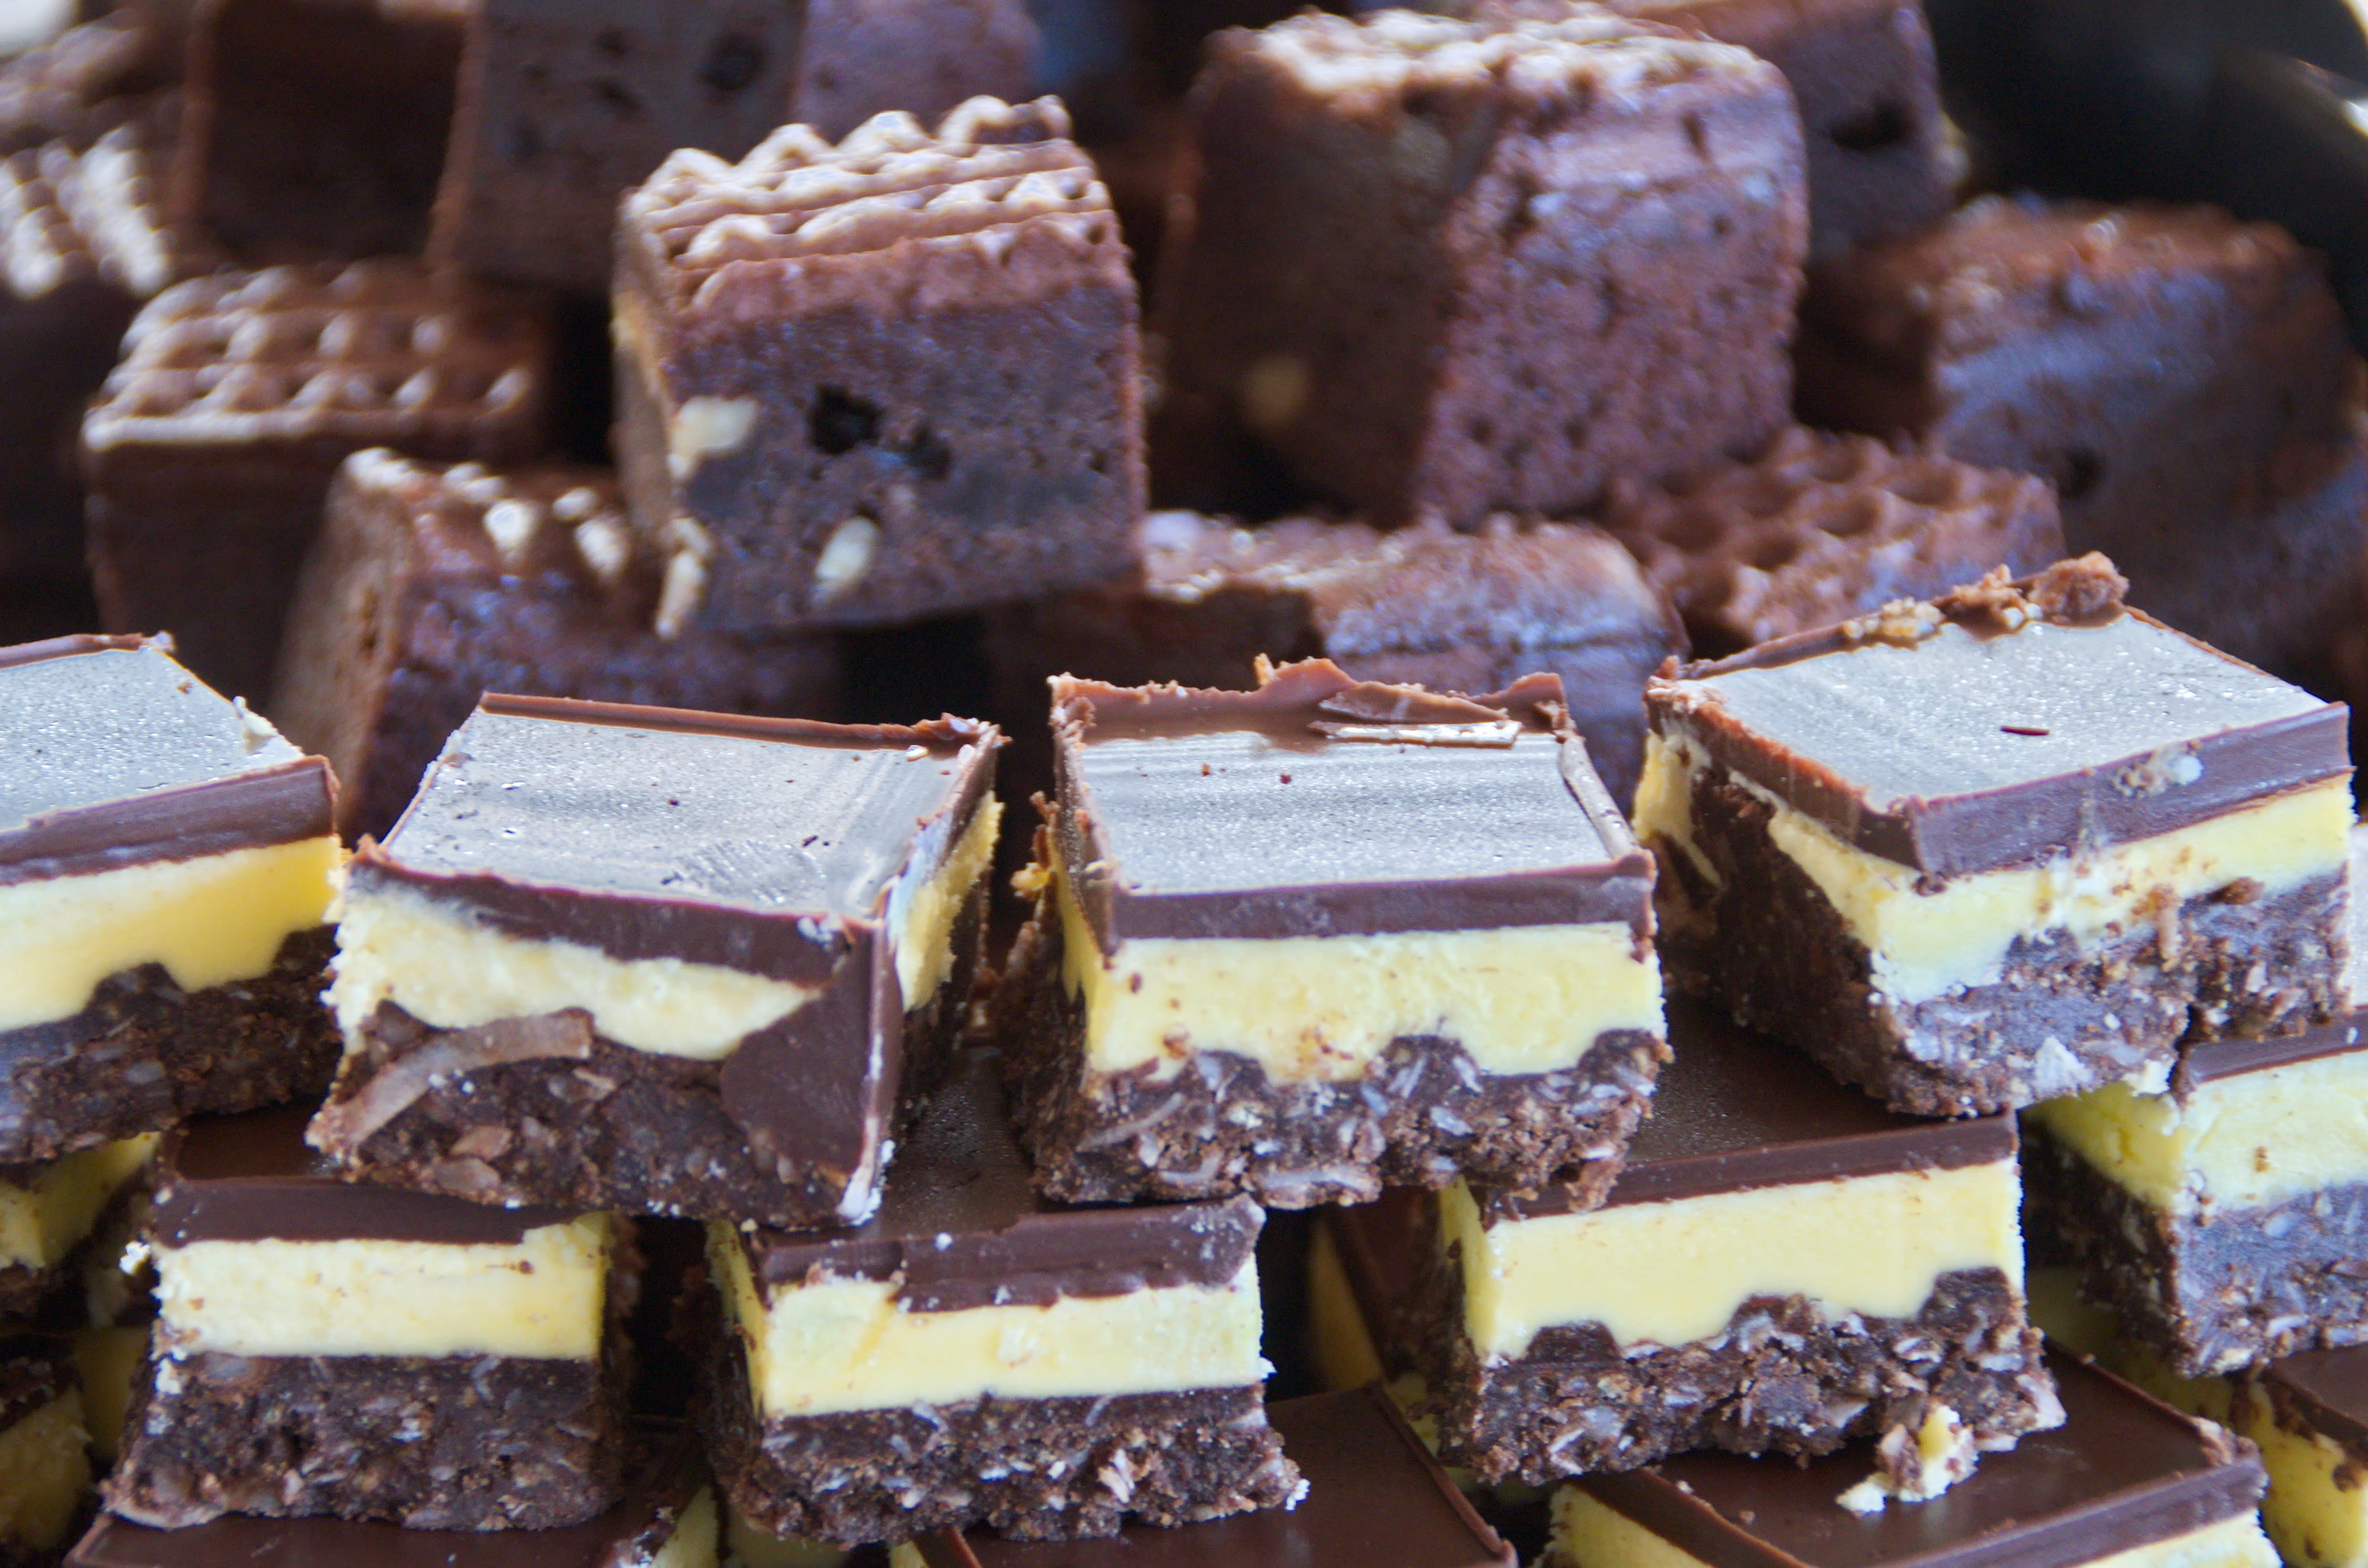 Two stacked rows of Nanaimo bars, which are layered treats containing wafer, nut, and coconut crumb base, custard icing, and chocolate ganache